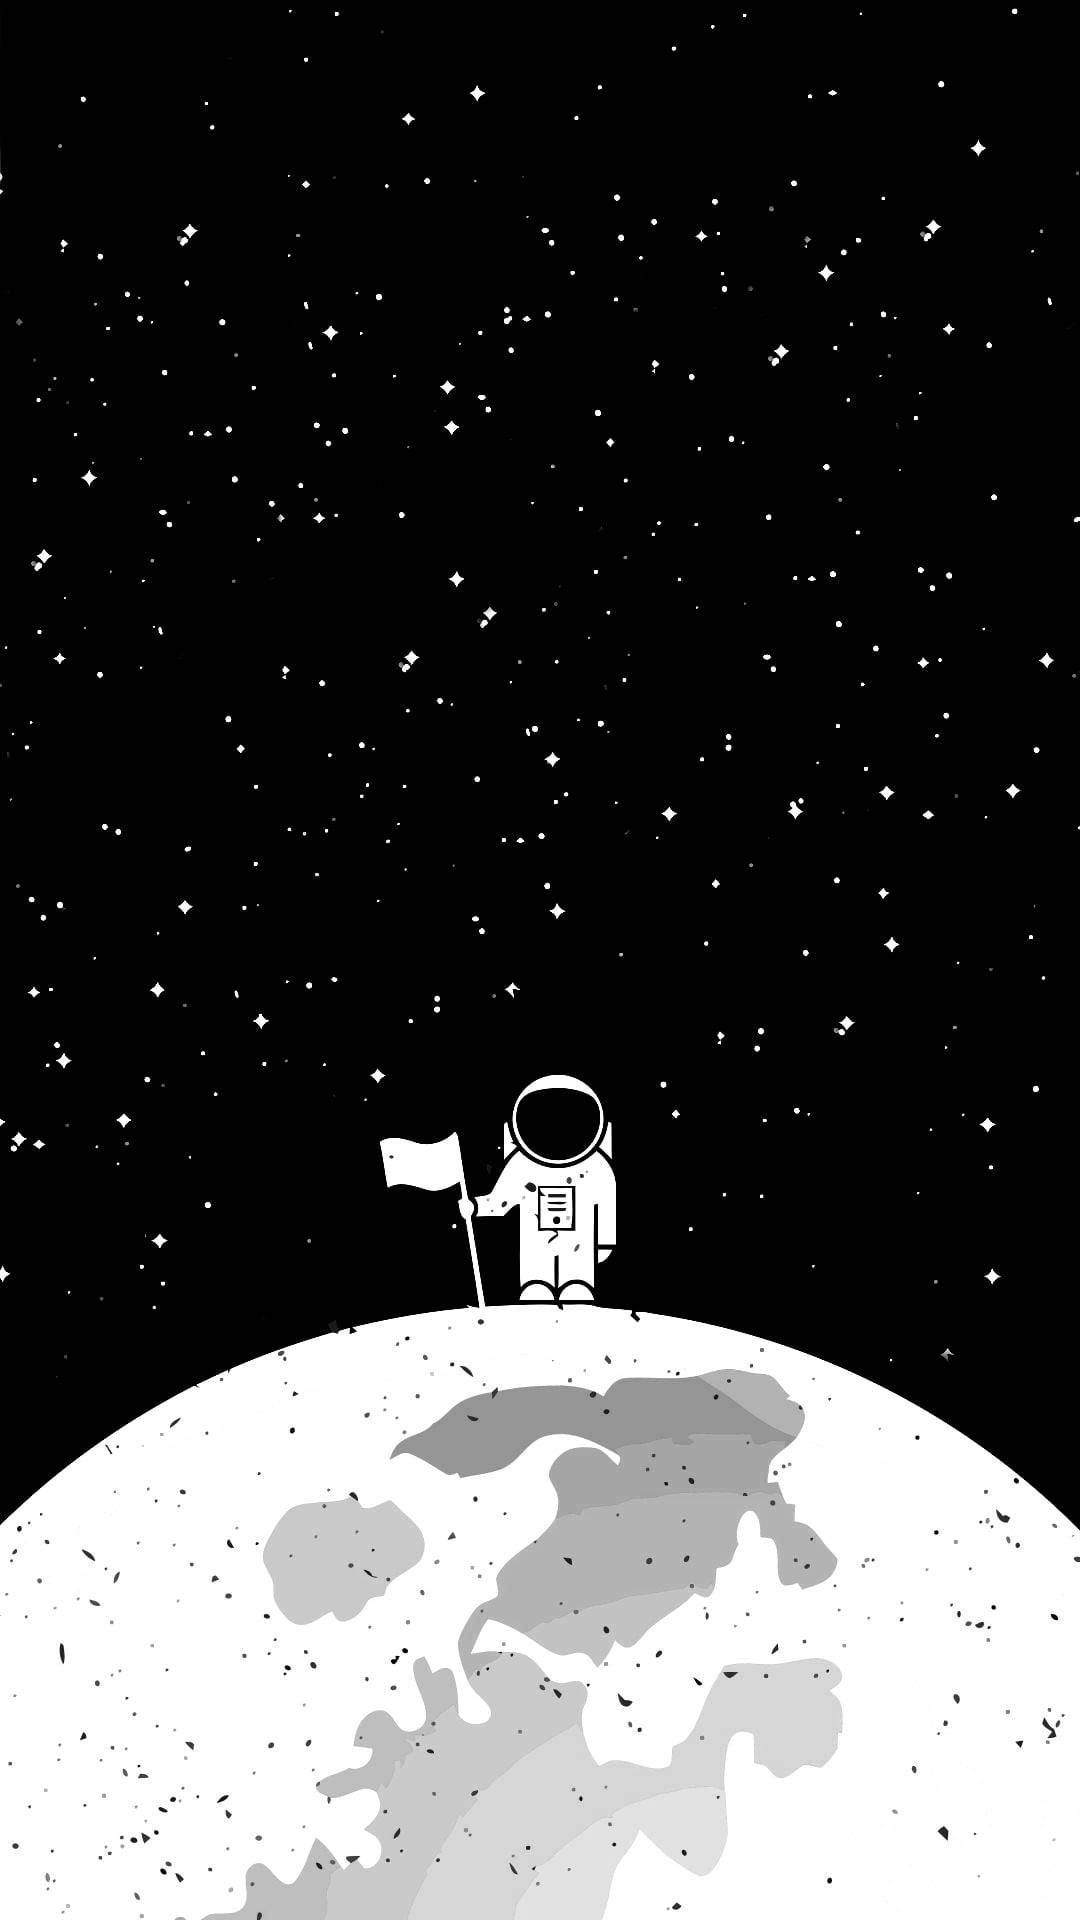 Astronaut And Moon Galaxy Iphone Wallpaper